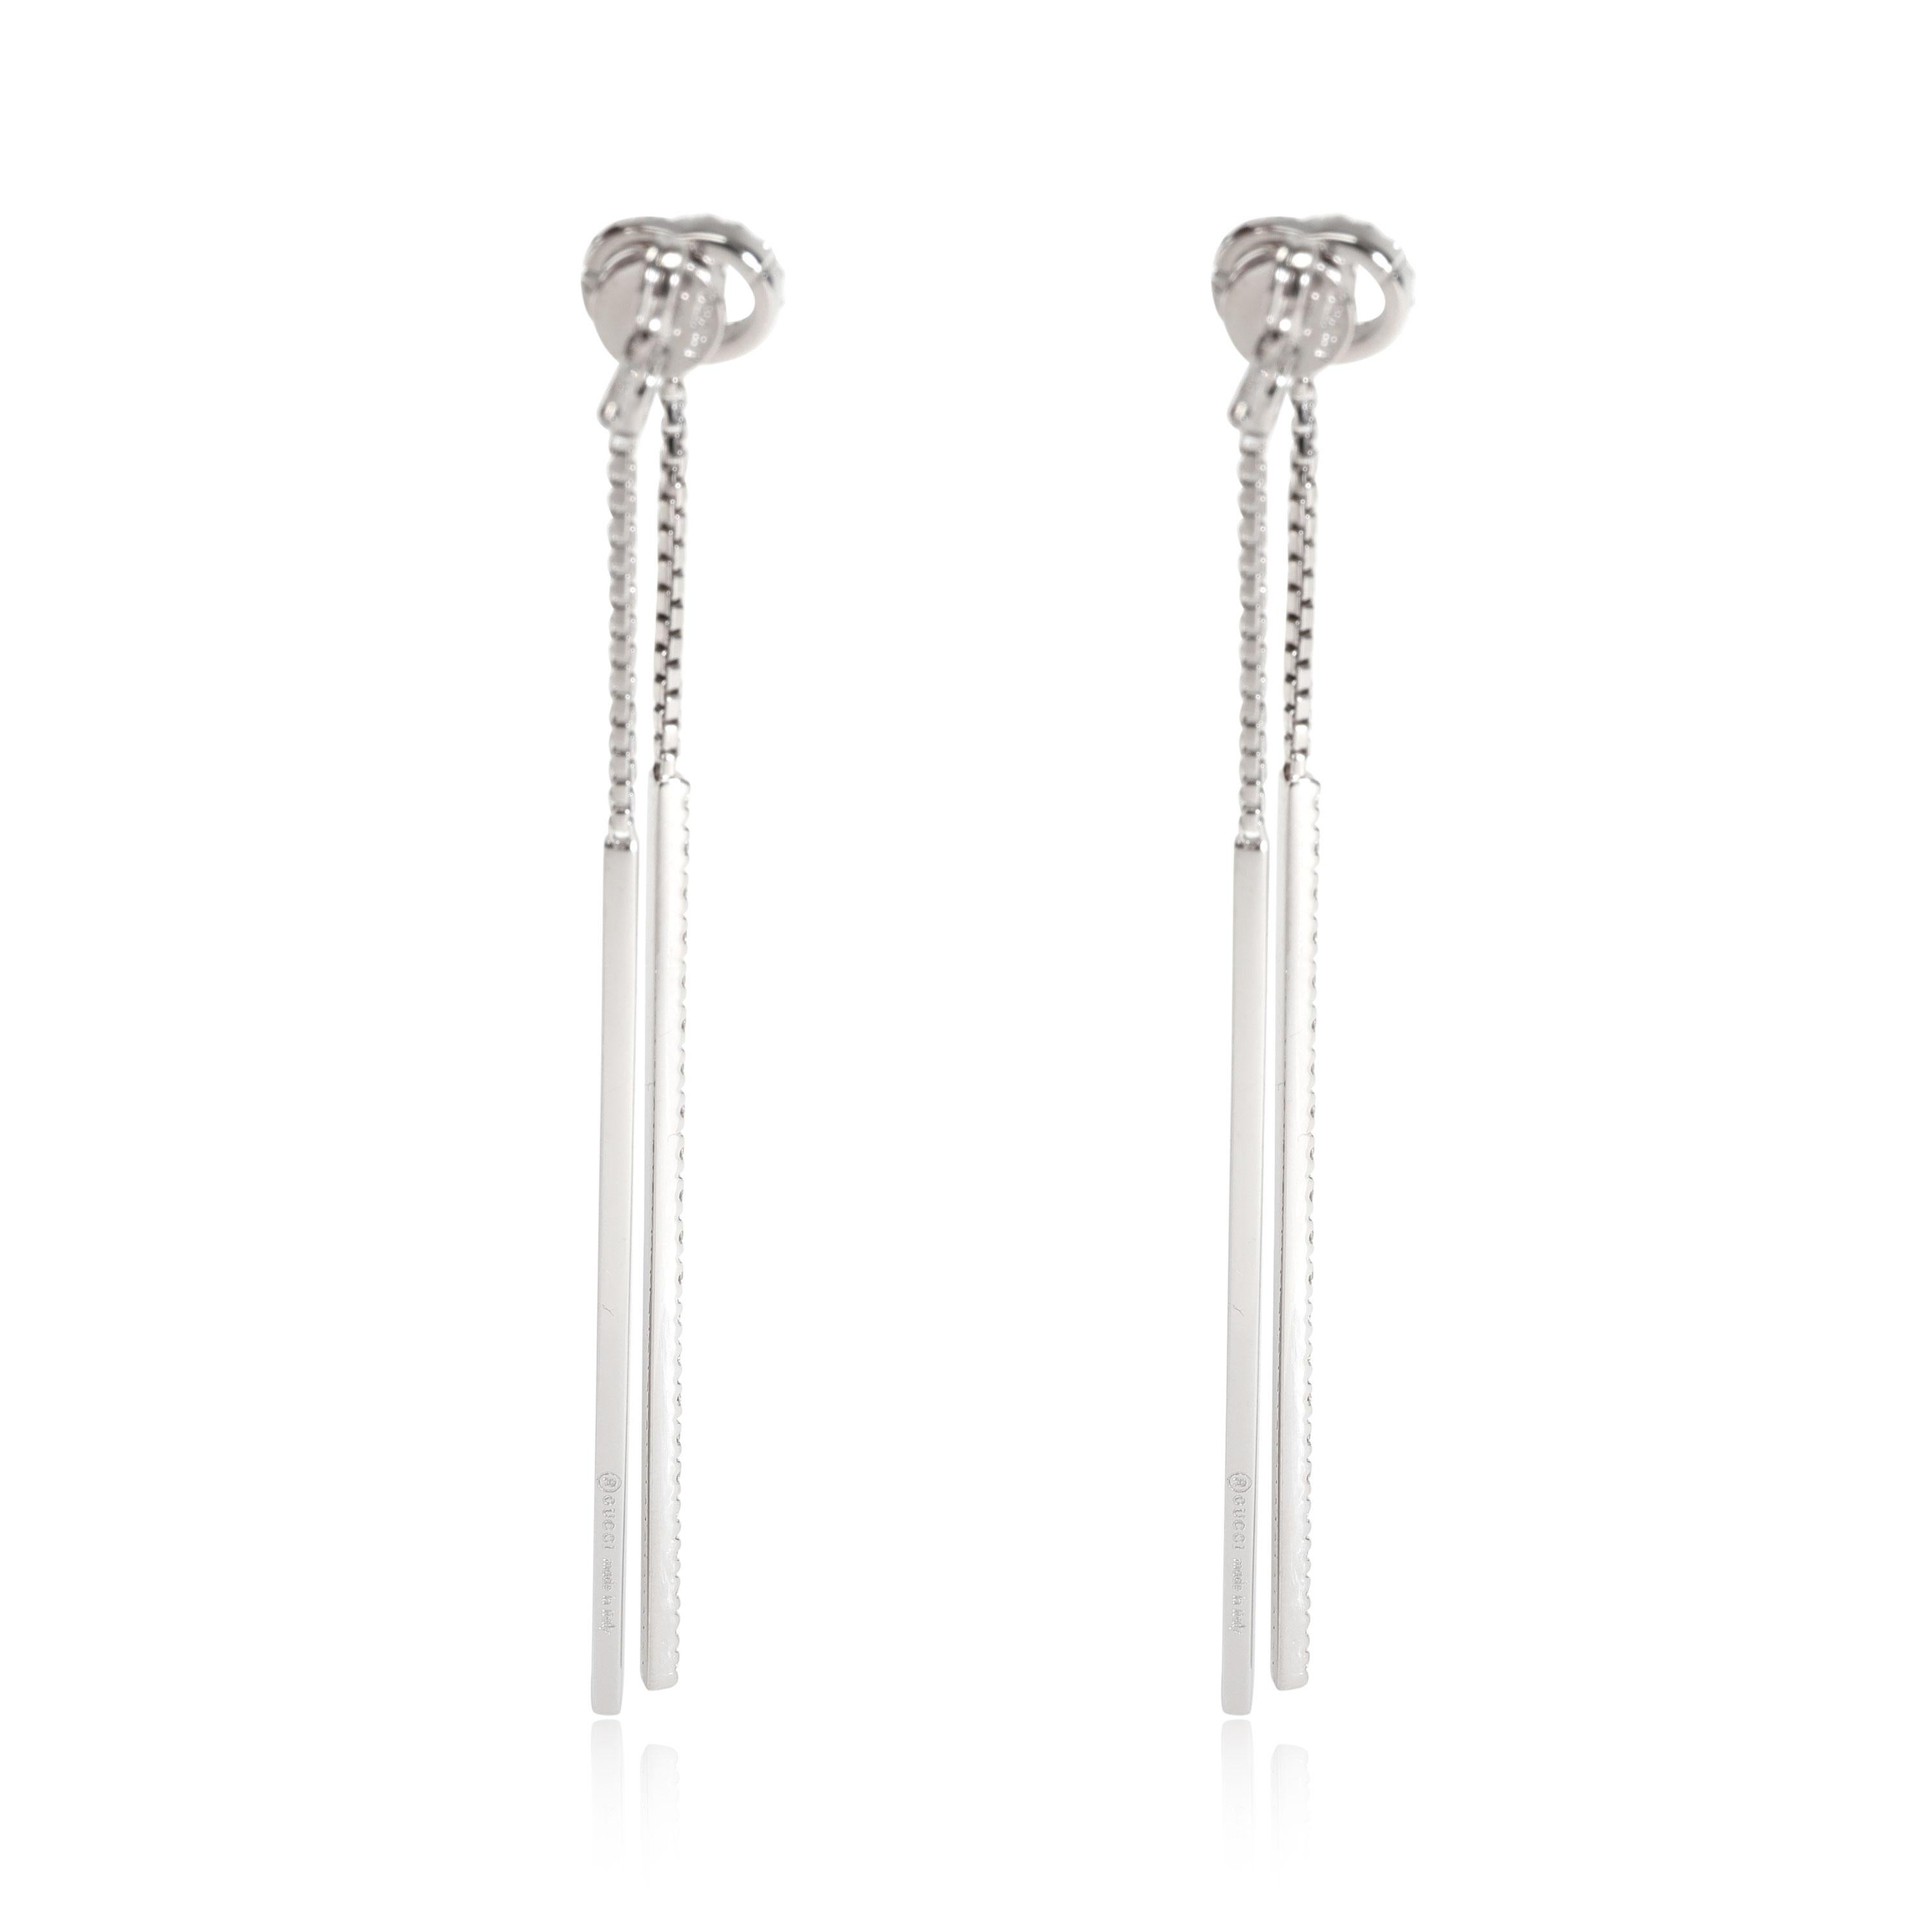 Gucci Running G Diamond Drop Earrings in 18k White Gold 0.56 CTW

PRIMARY DETAILS
SKU: 114444
Listing Title: Gucci Running G Diamond Drop Earrings in 18k White Gold 0.56 CTW
Condition Description: Length is 2 3/8 inches. Retails for USD 3800. Comes